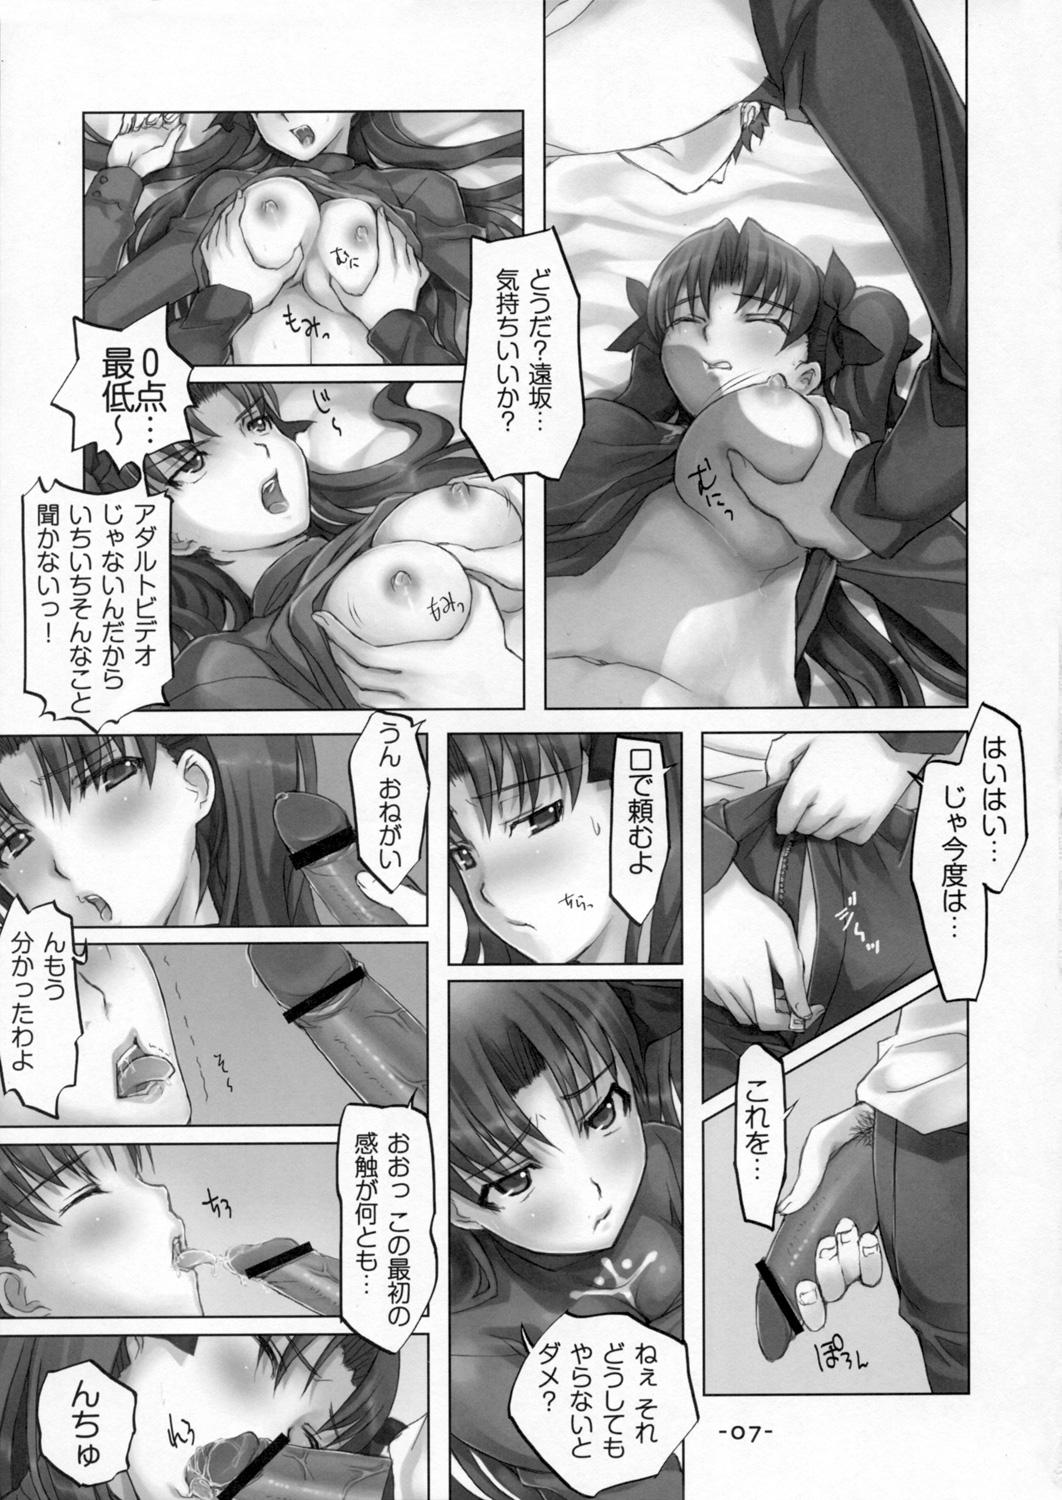 Femdom Clips DAILY LIFE - Fate stay night Fate hollow ataraxia Nigeria - Page 6